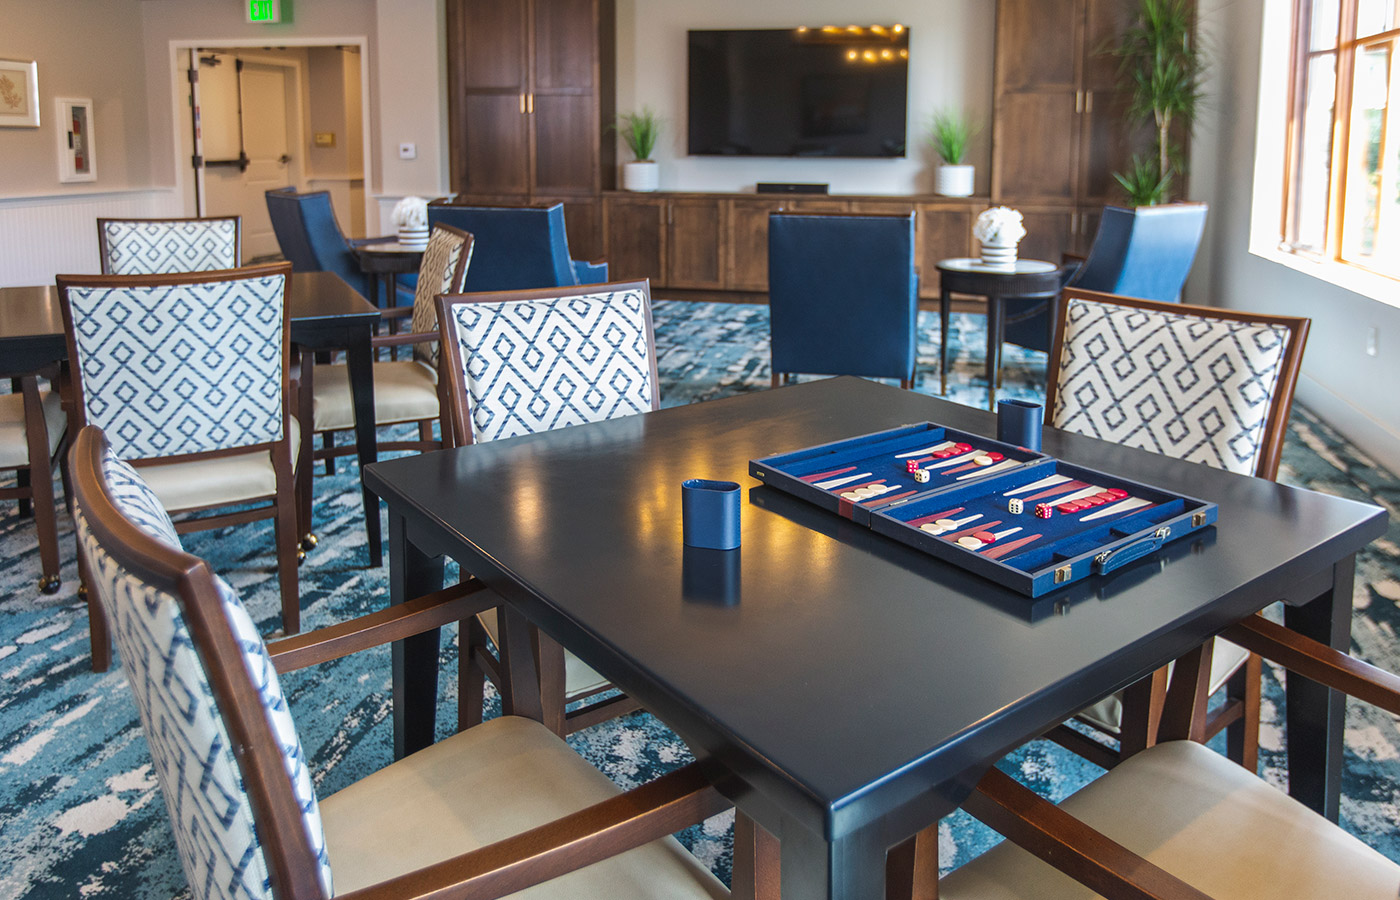 Table and game in a common area at Crown Cove.